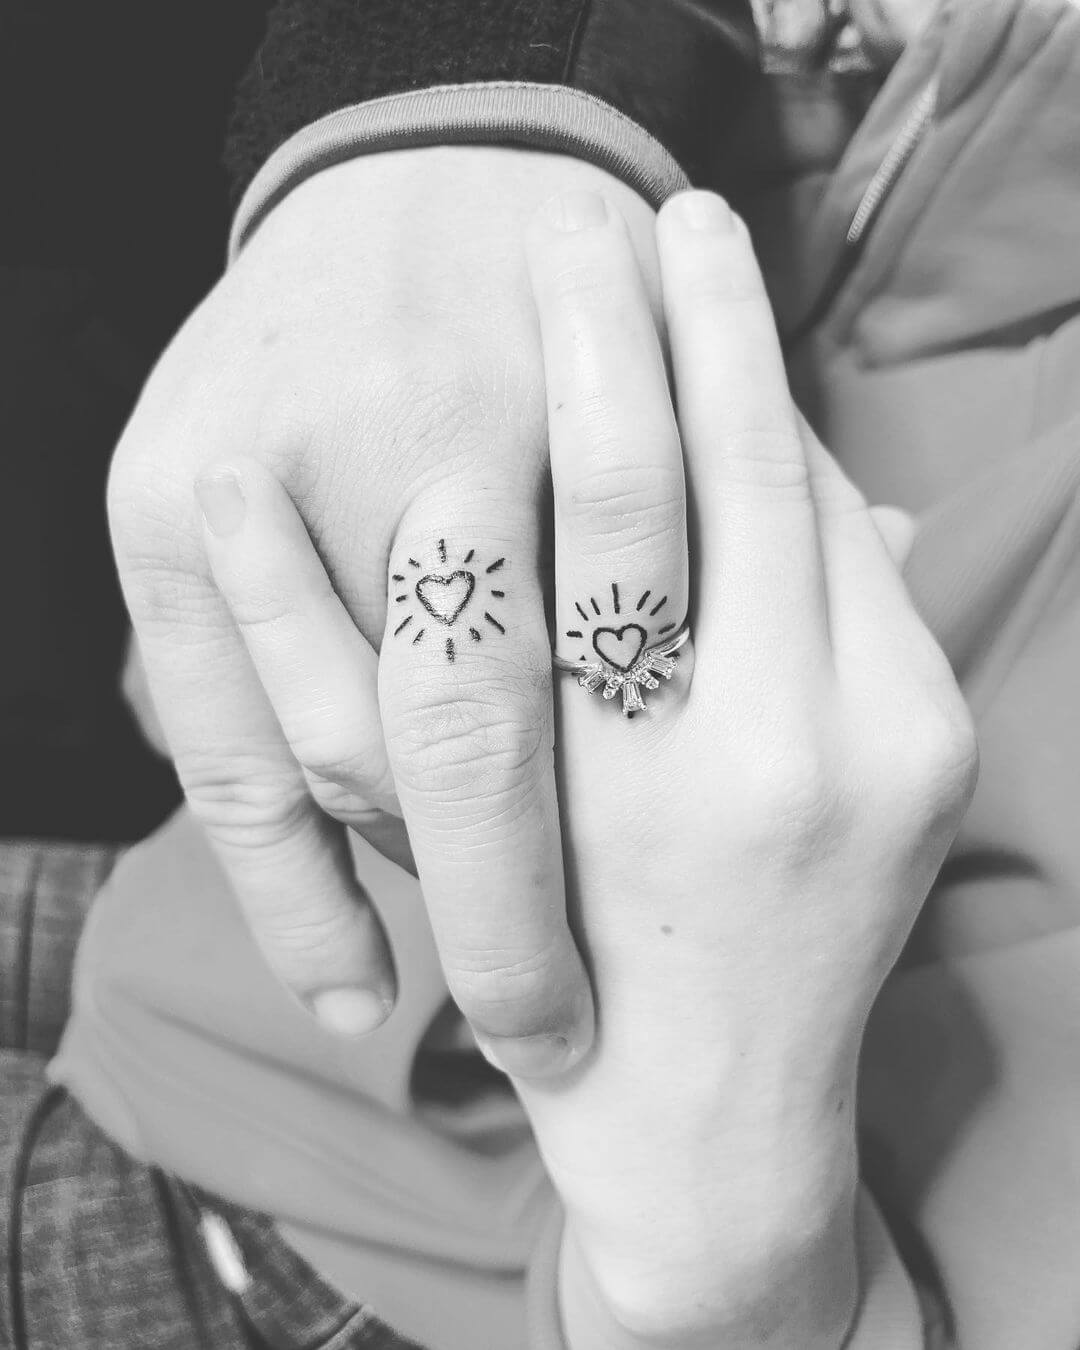 Couple Rings Tattoo On Fingers - Tattoos Designs